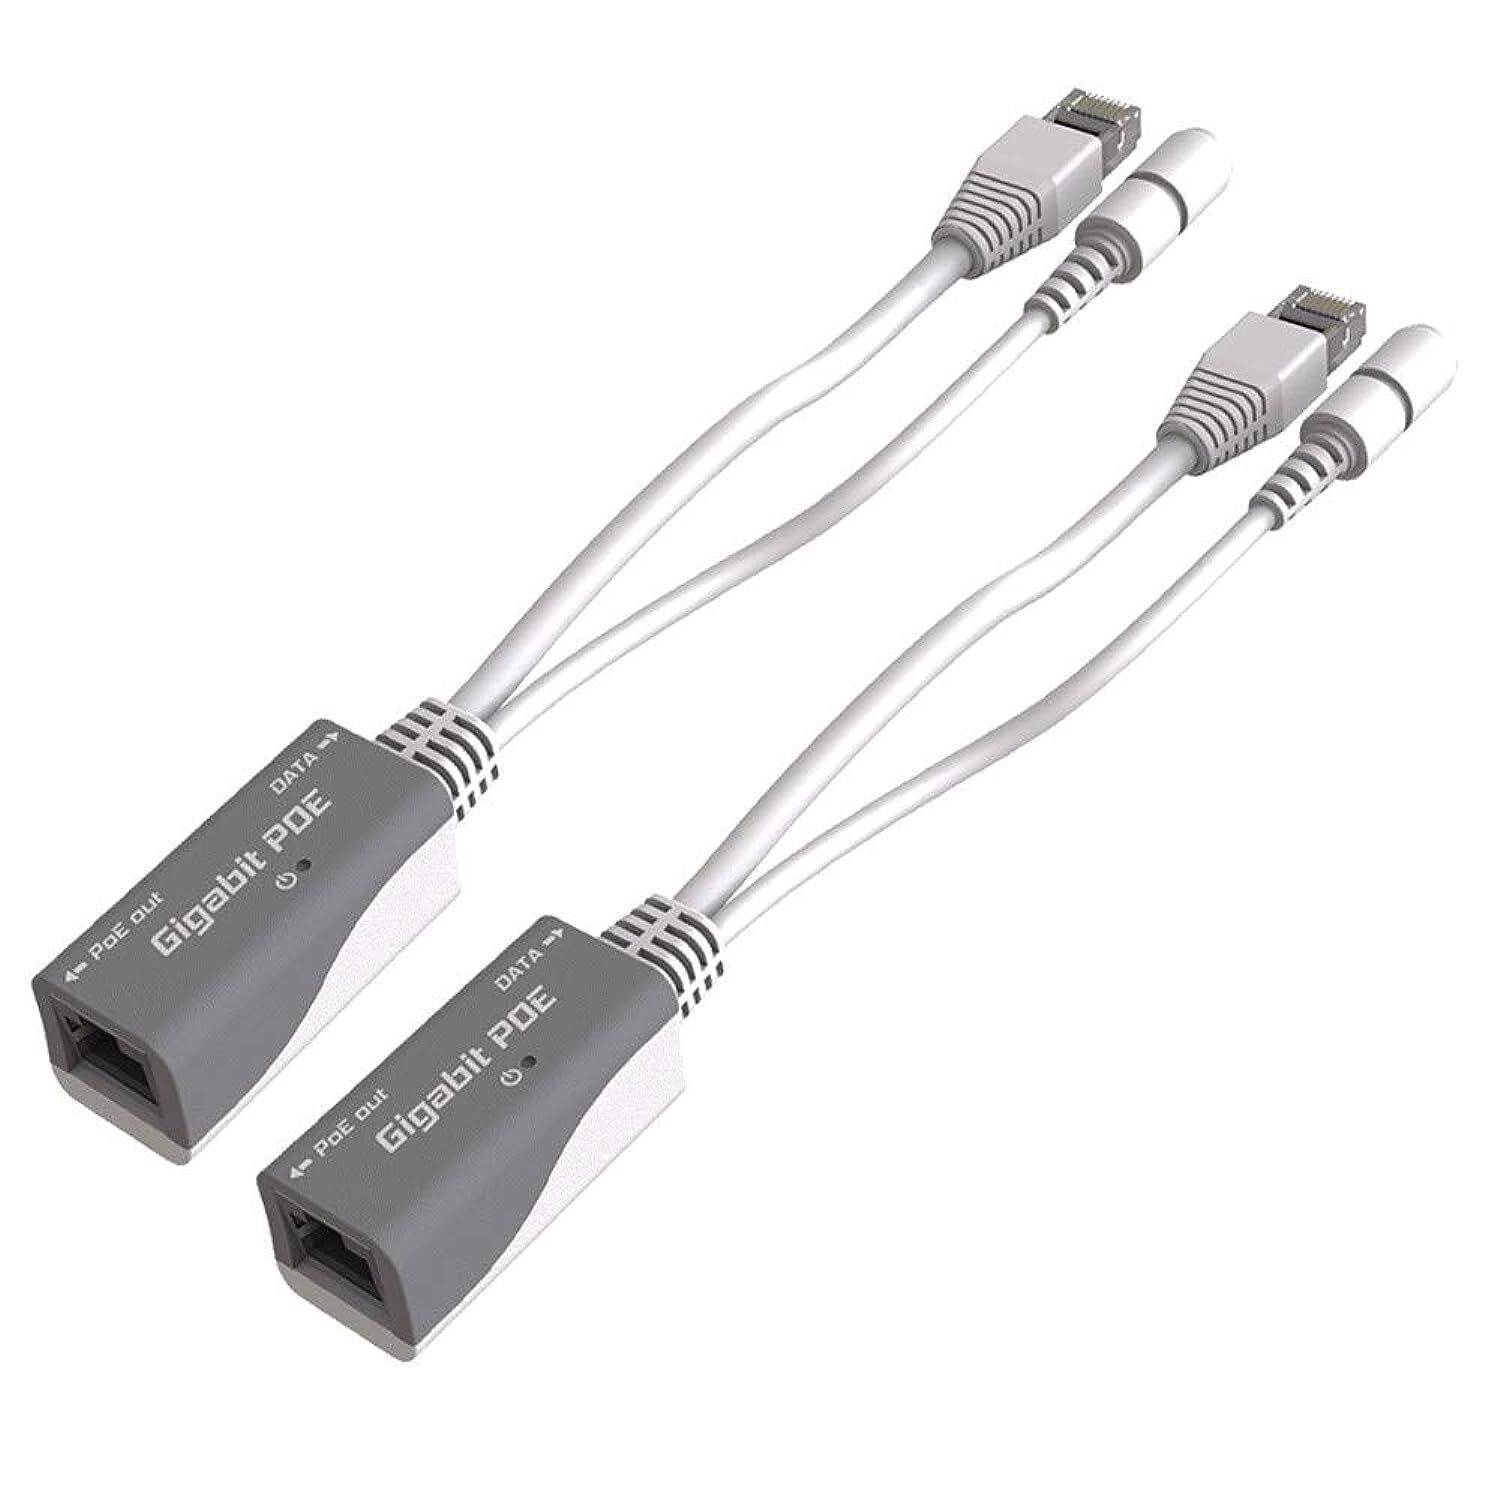 Mikrotik RBGPOE PoE Injector 2 Units with Shielded Connectors for Gigabit LAN